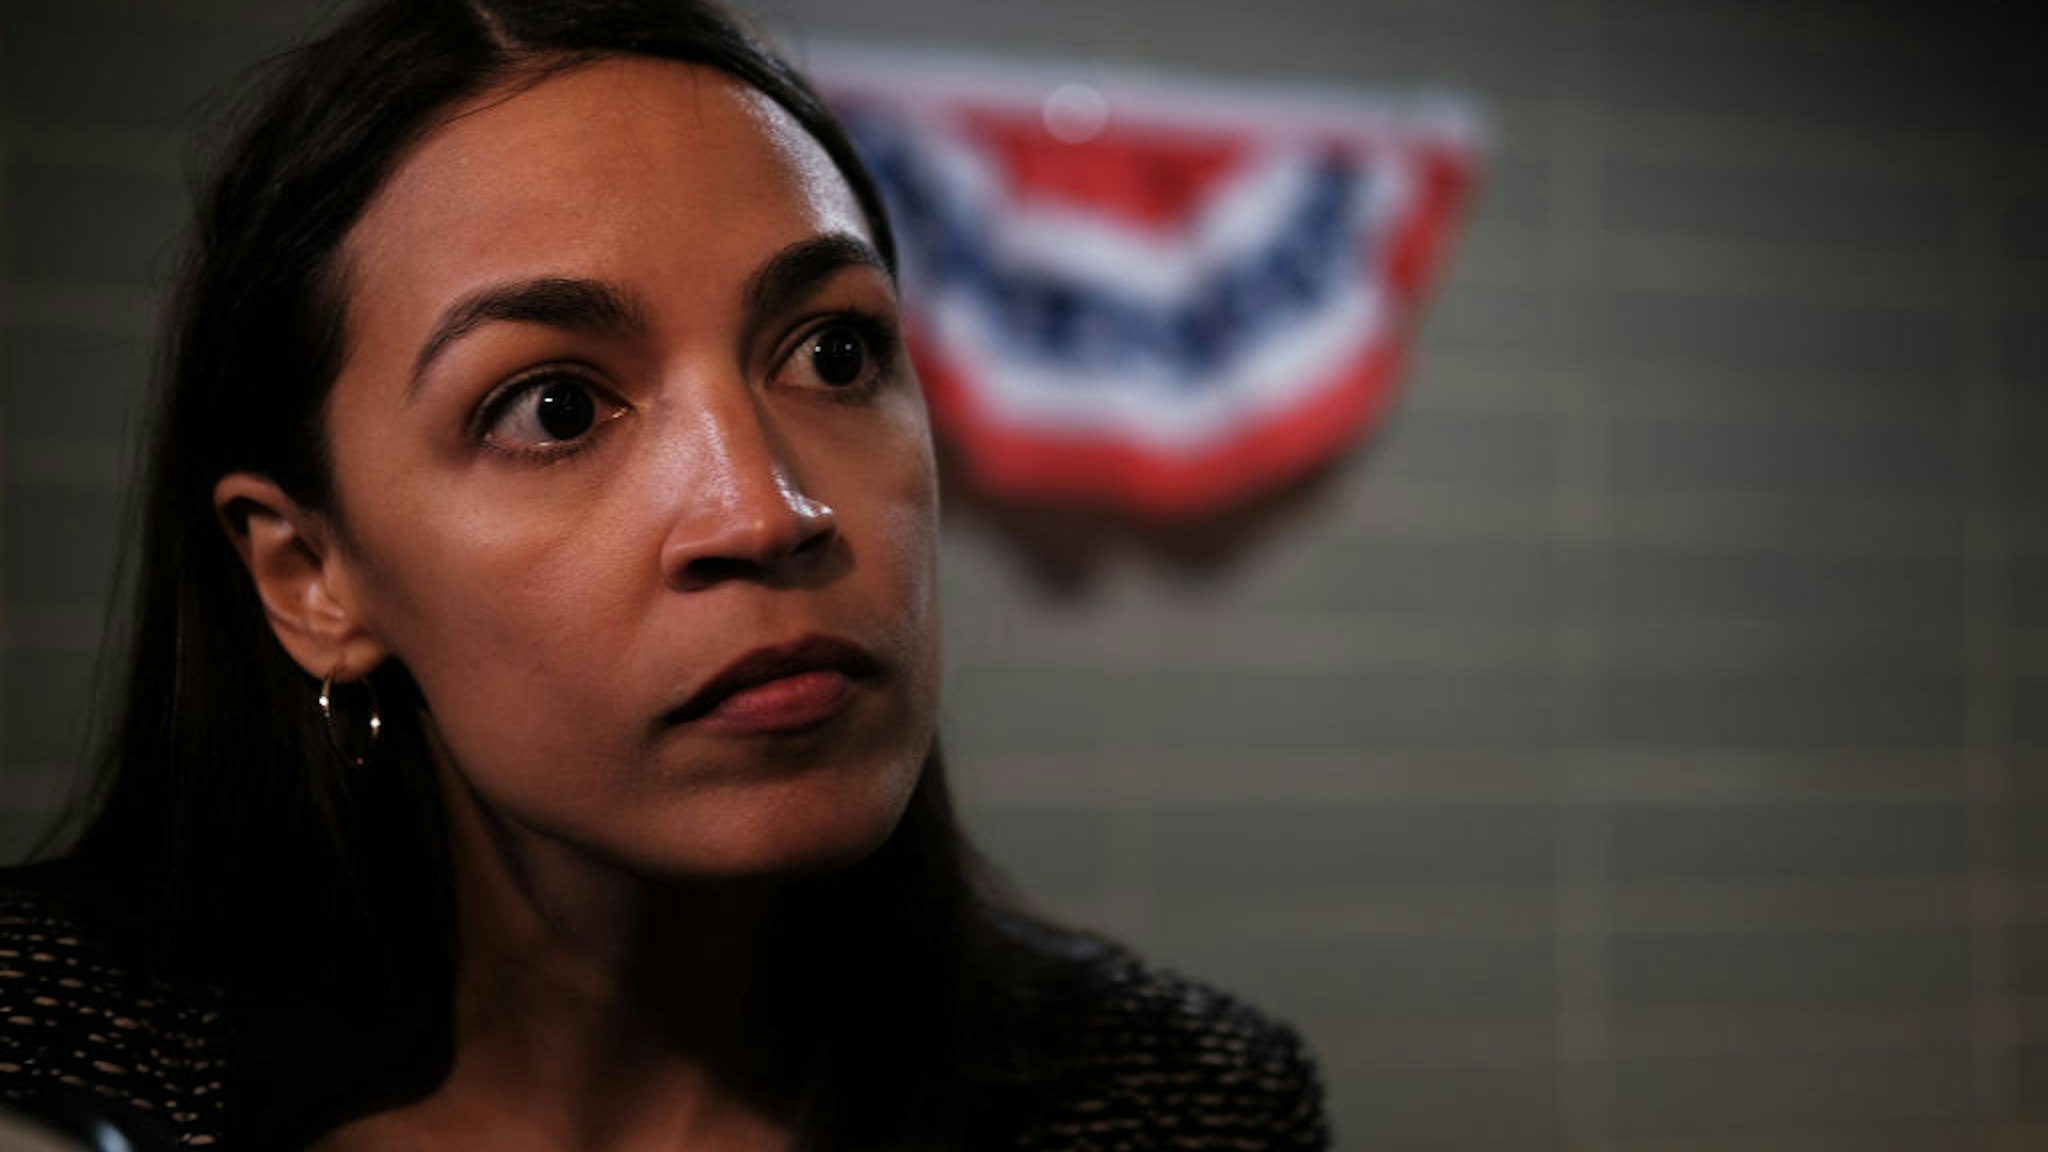 NEW YORK, NEW YORK - AUGUST 29: U.S. Rep. Alexandria Ocasio-Cortez (D-NY) speaks to the media after a public housing town hall at a New York City Housing Authority (NYCHA) residence on August 29, 2019 in the Bronx borough of New York City. Cortez, who represents residents from parts of the Bronx and Queens boroughs, spoke about issues residents face in New York, where one in 14 live in public housing.